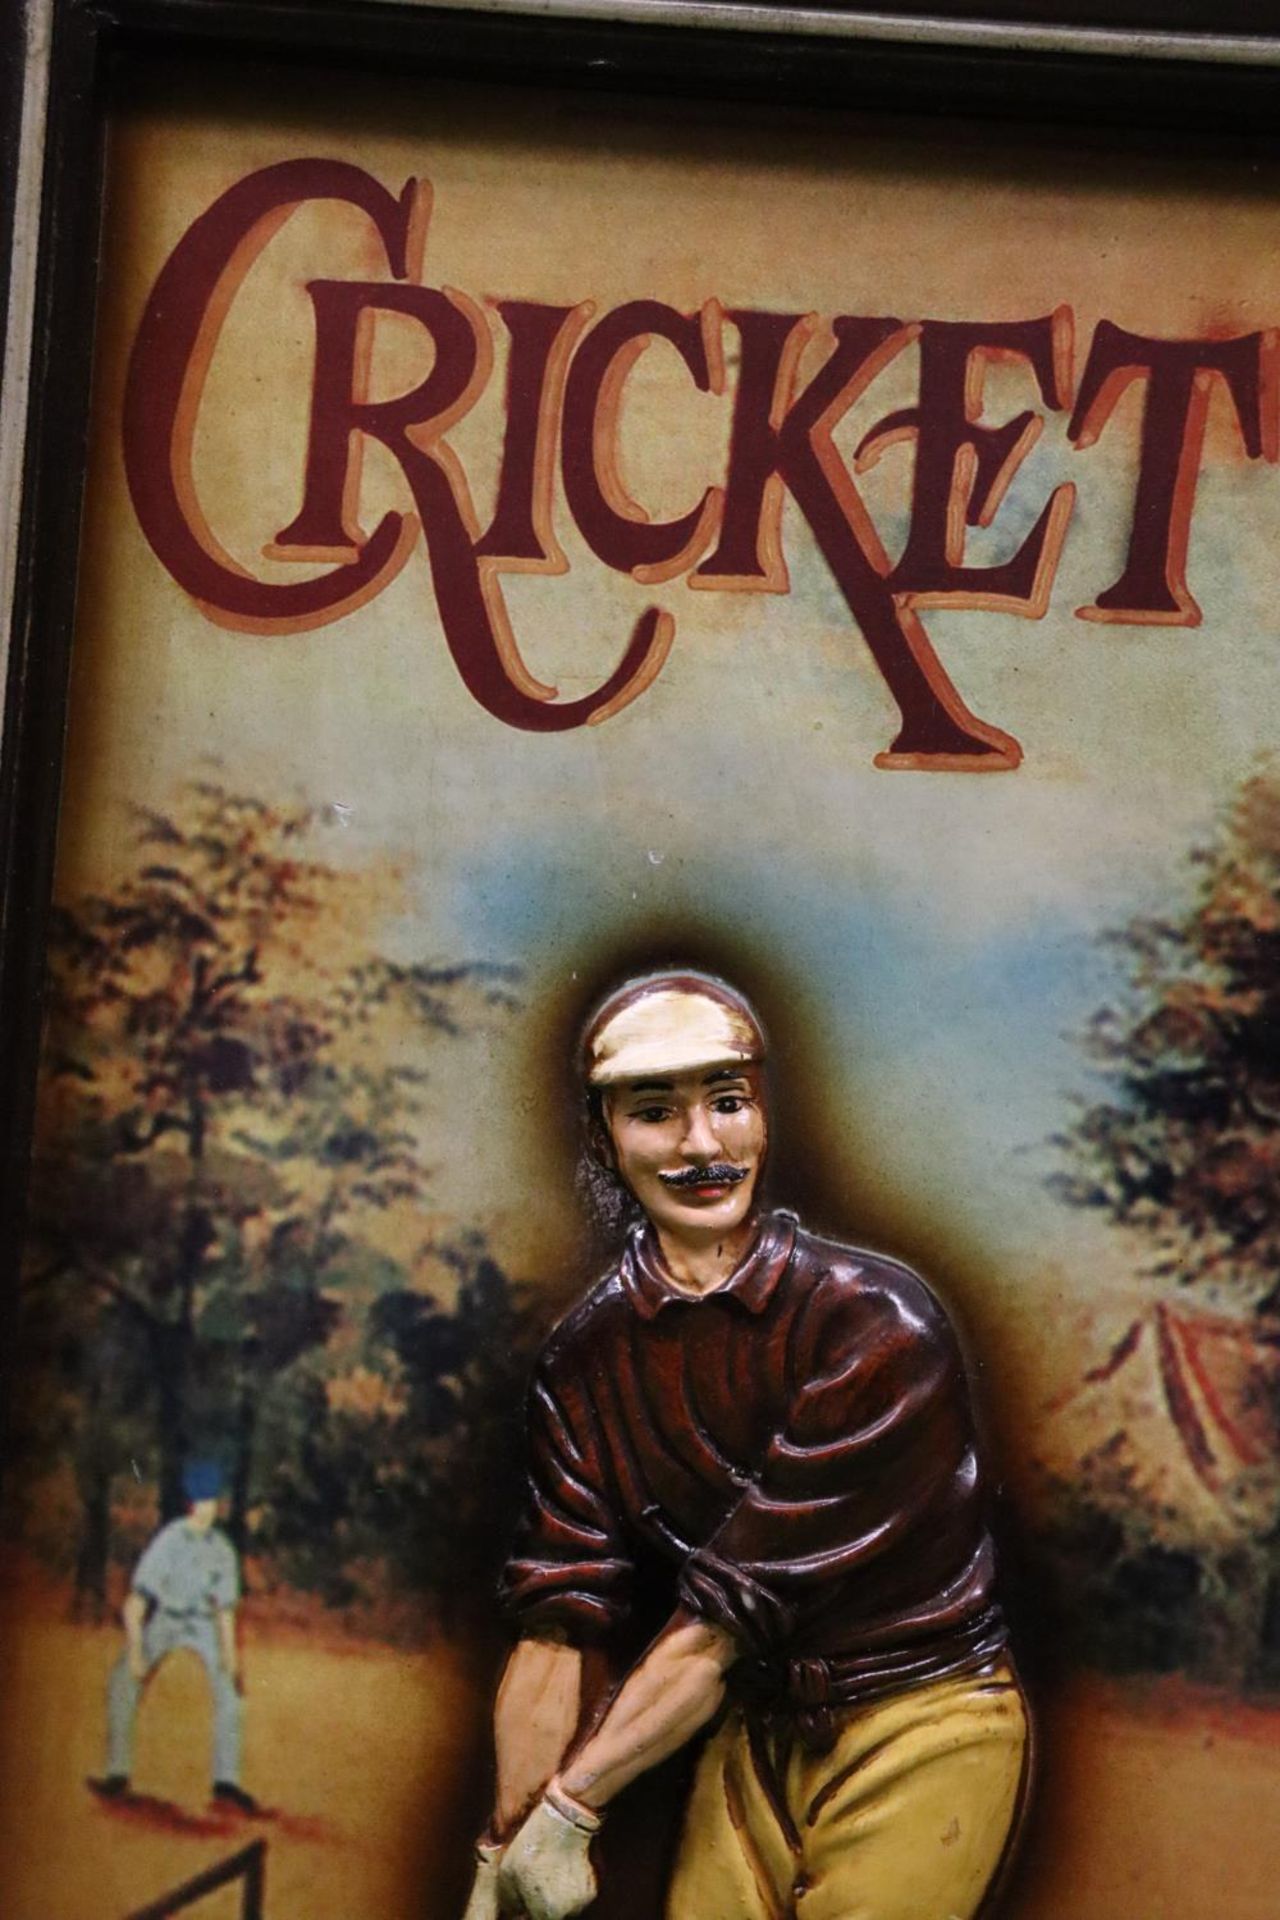 A 3-D 'VICTORIAN' CRICKET CLUB, WOODEN SIGN, 39CM X 54CM - Image 2 of 3